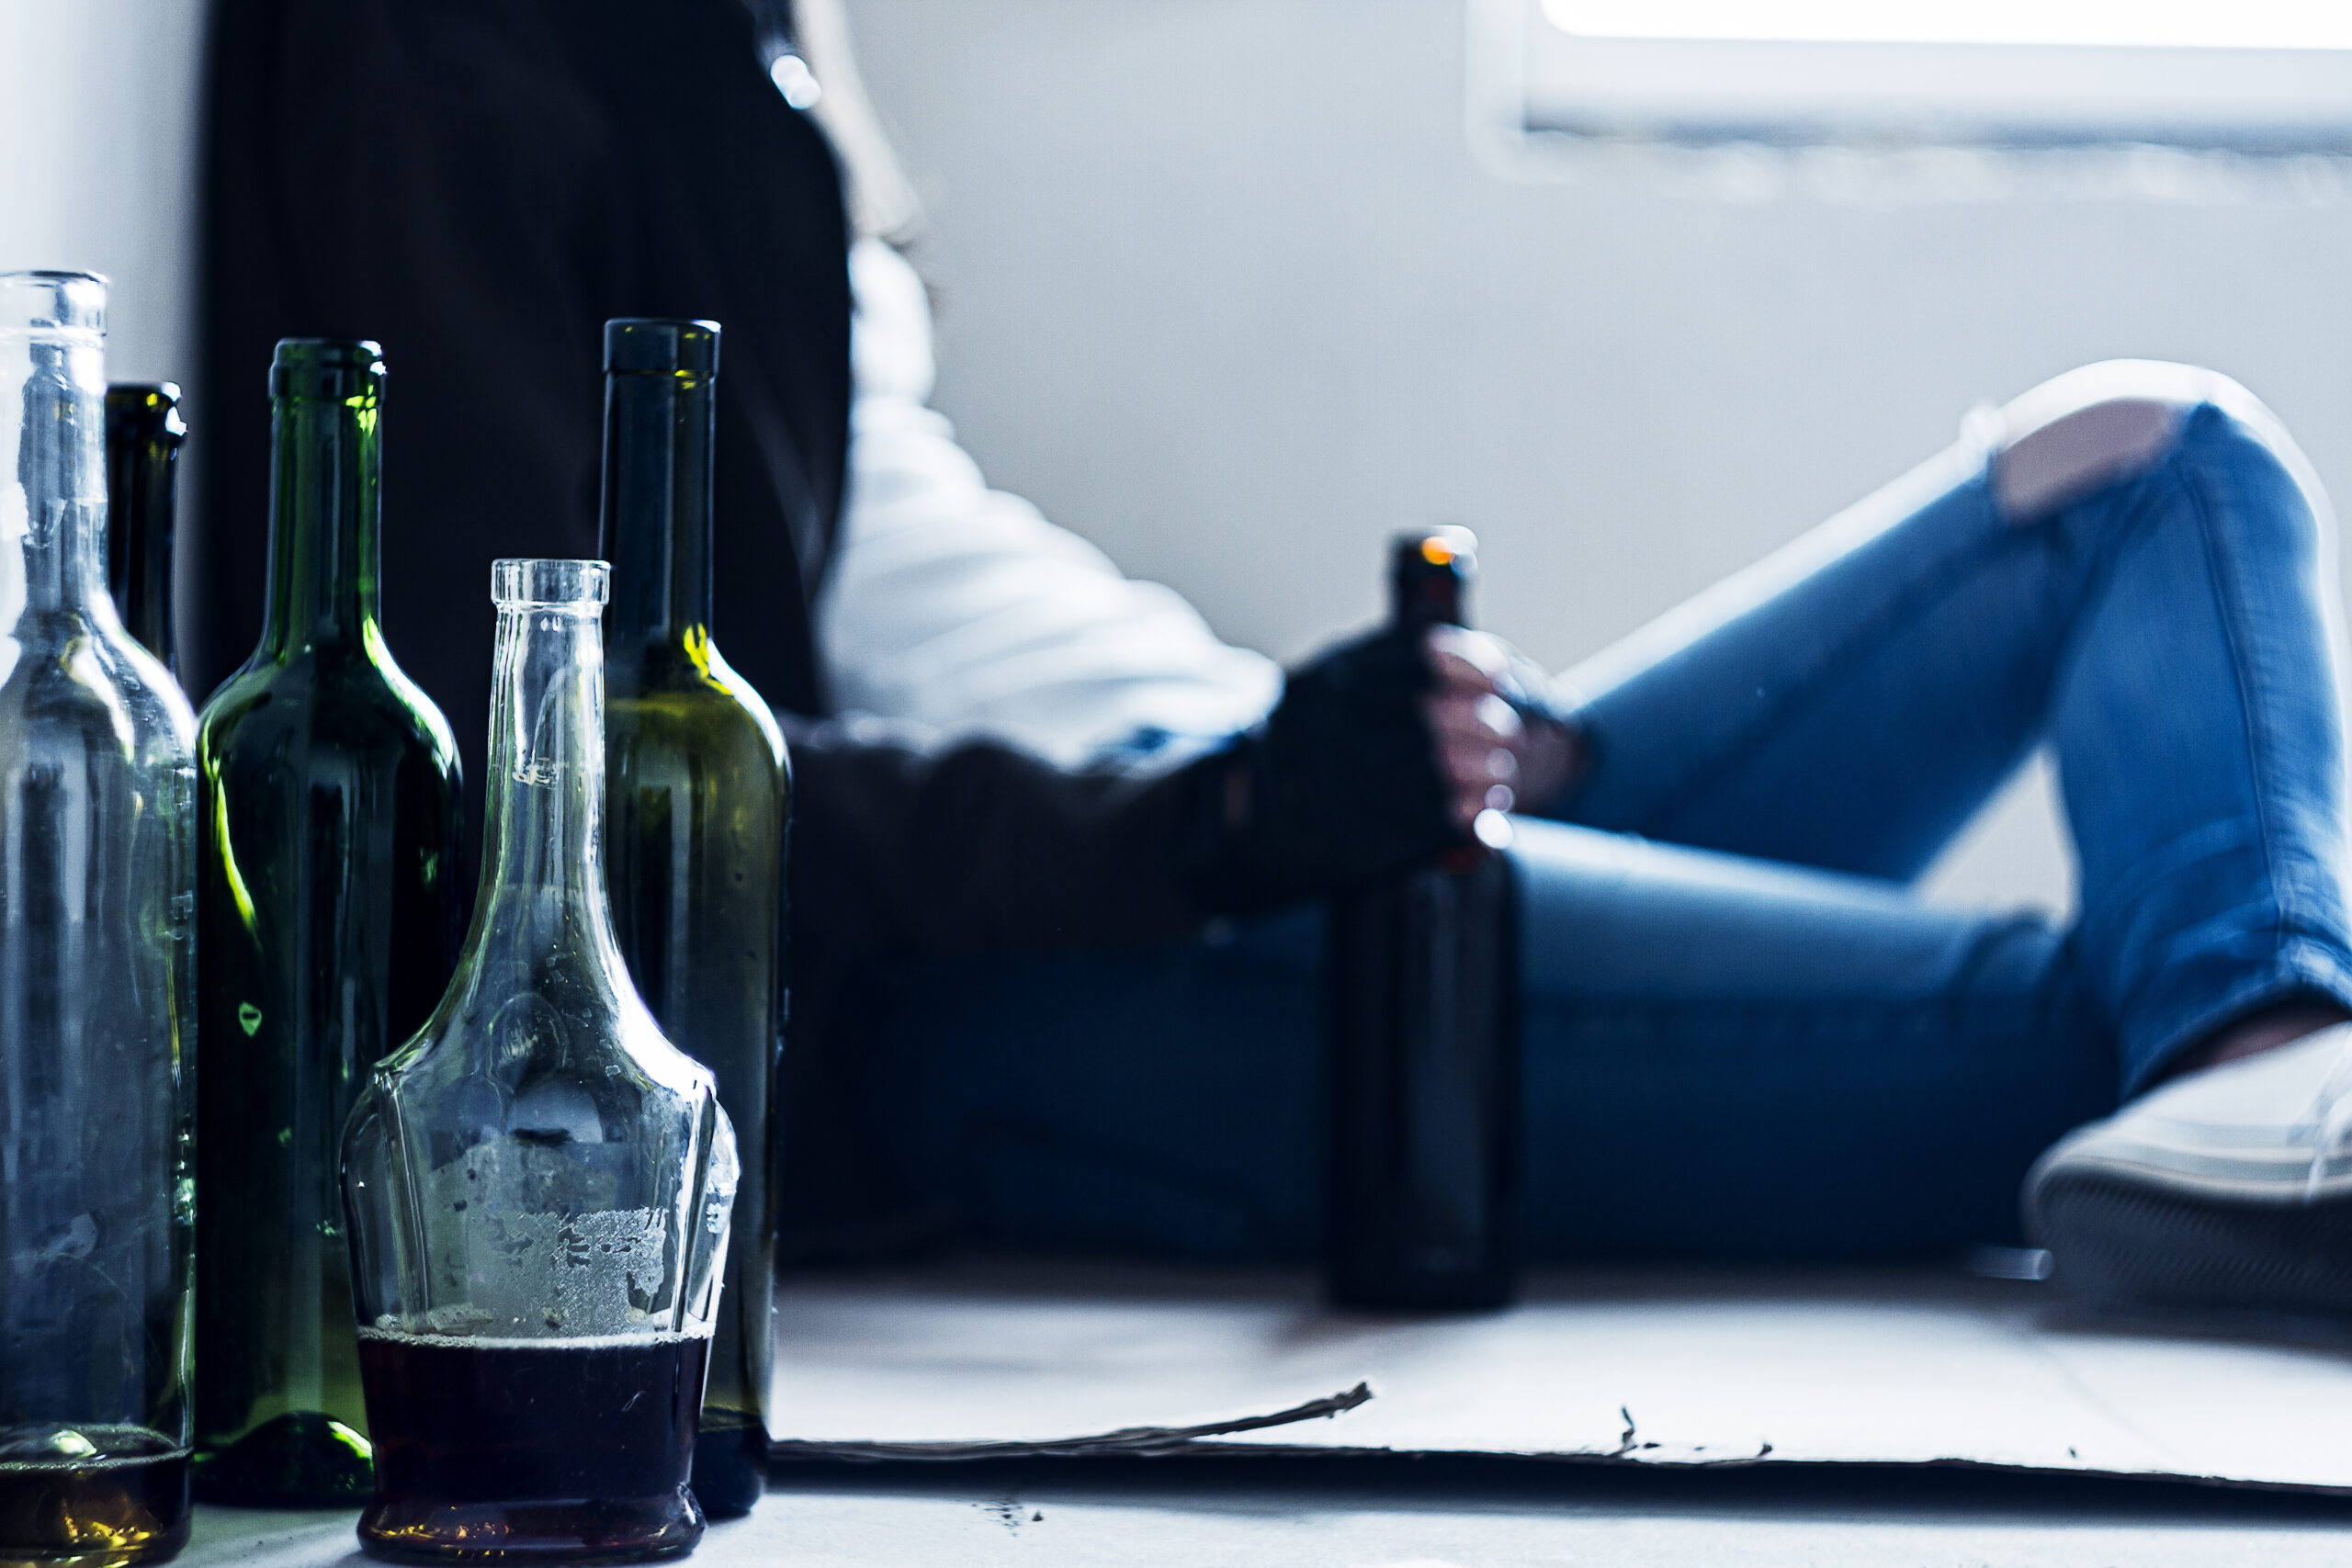 Signs and Symptoms of Alcohol Abuse